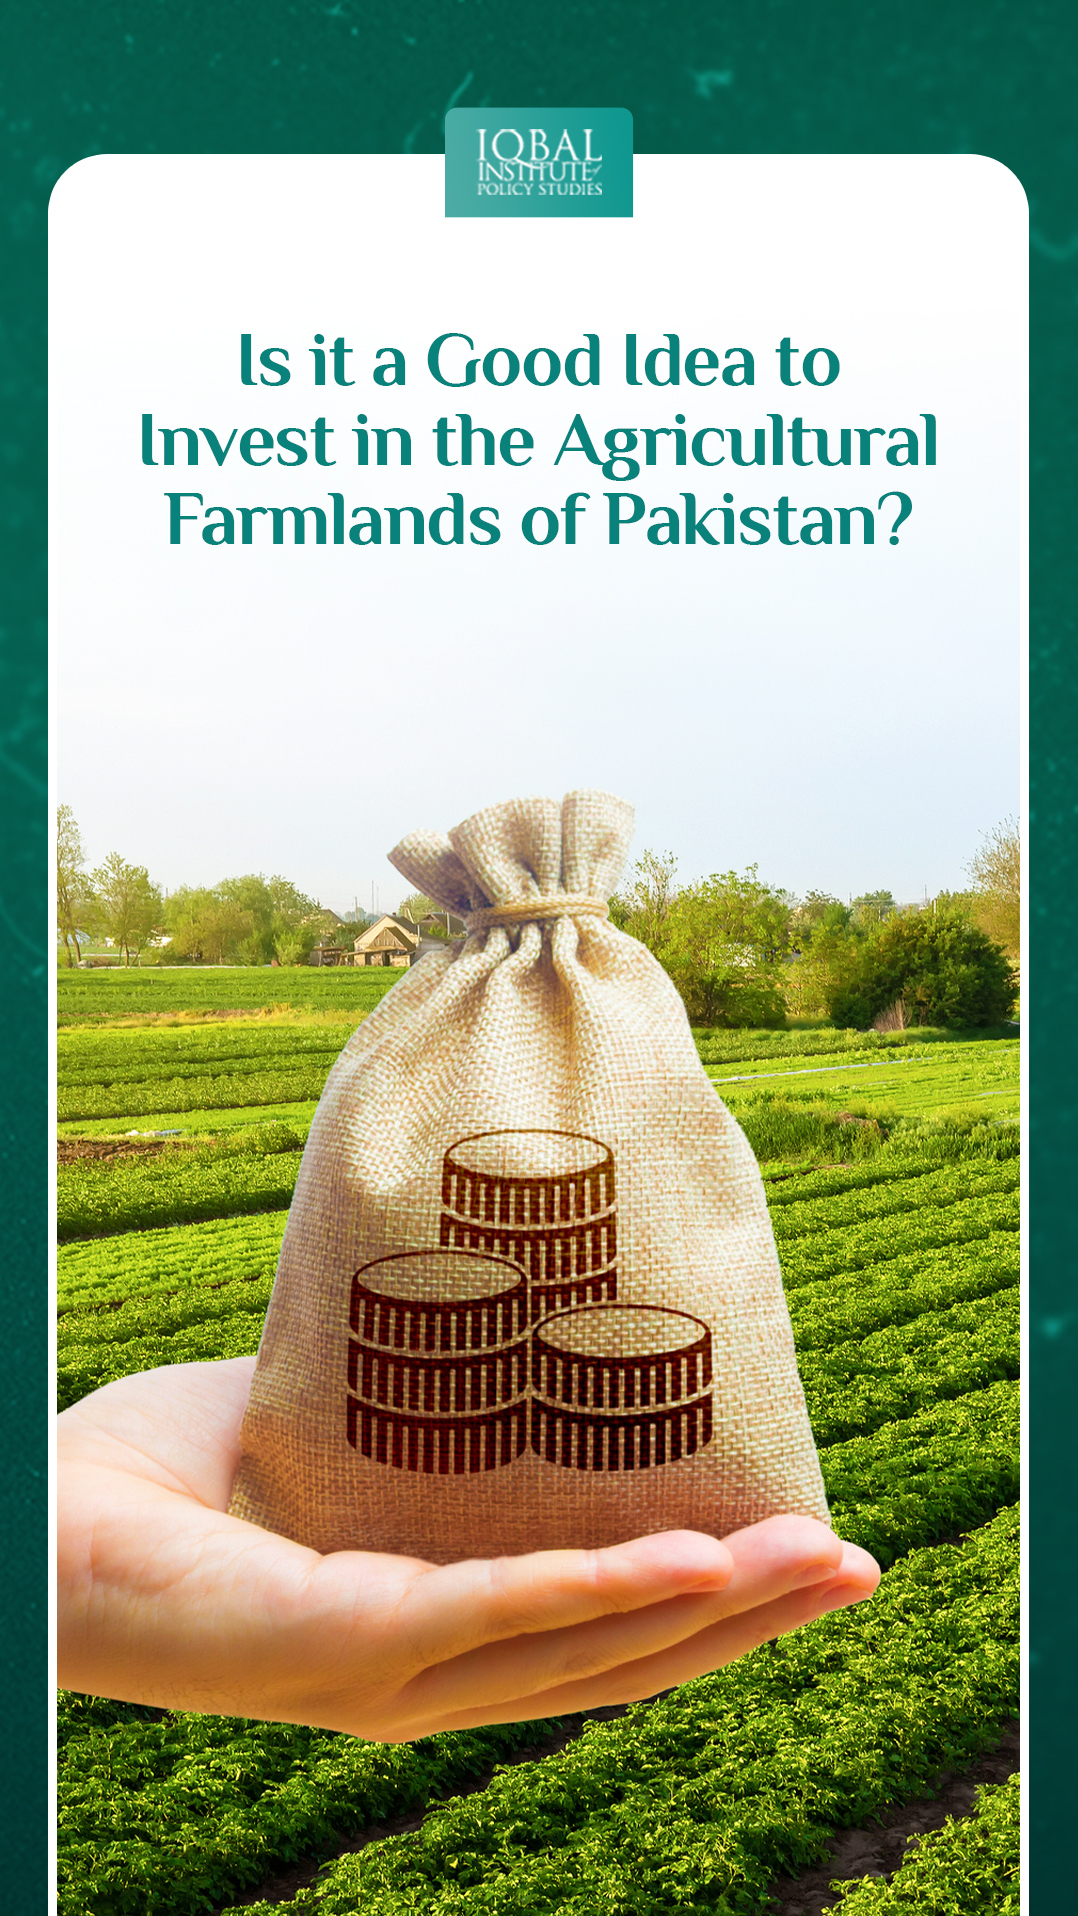 Is it a good idea to Invest in the Agricultural Farmlands of Pakistan?